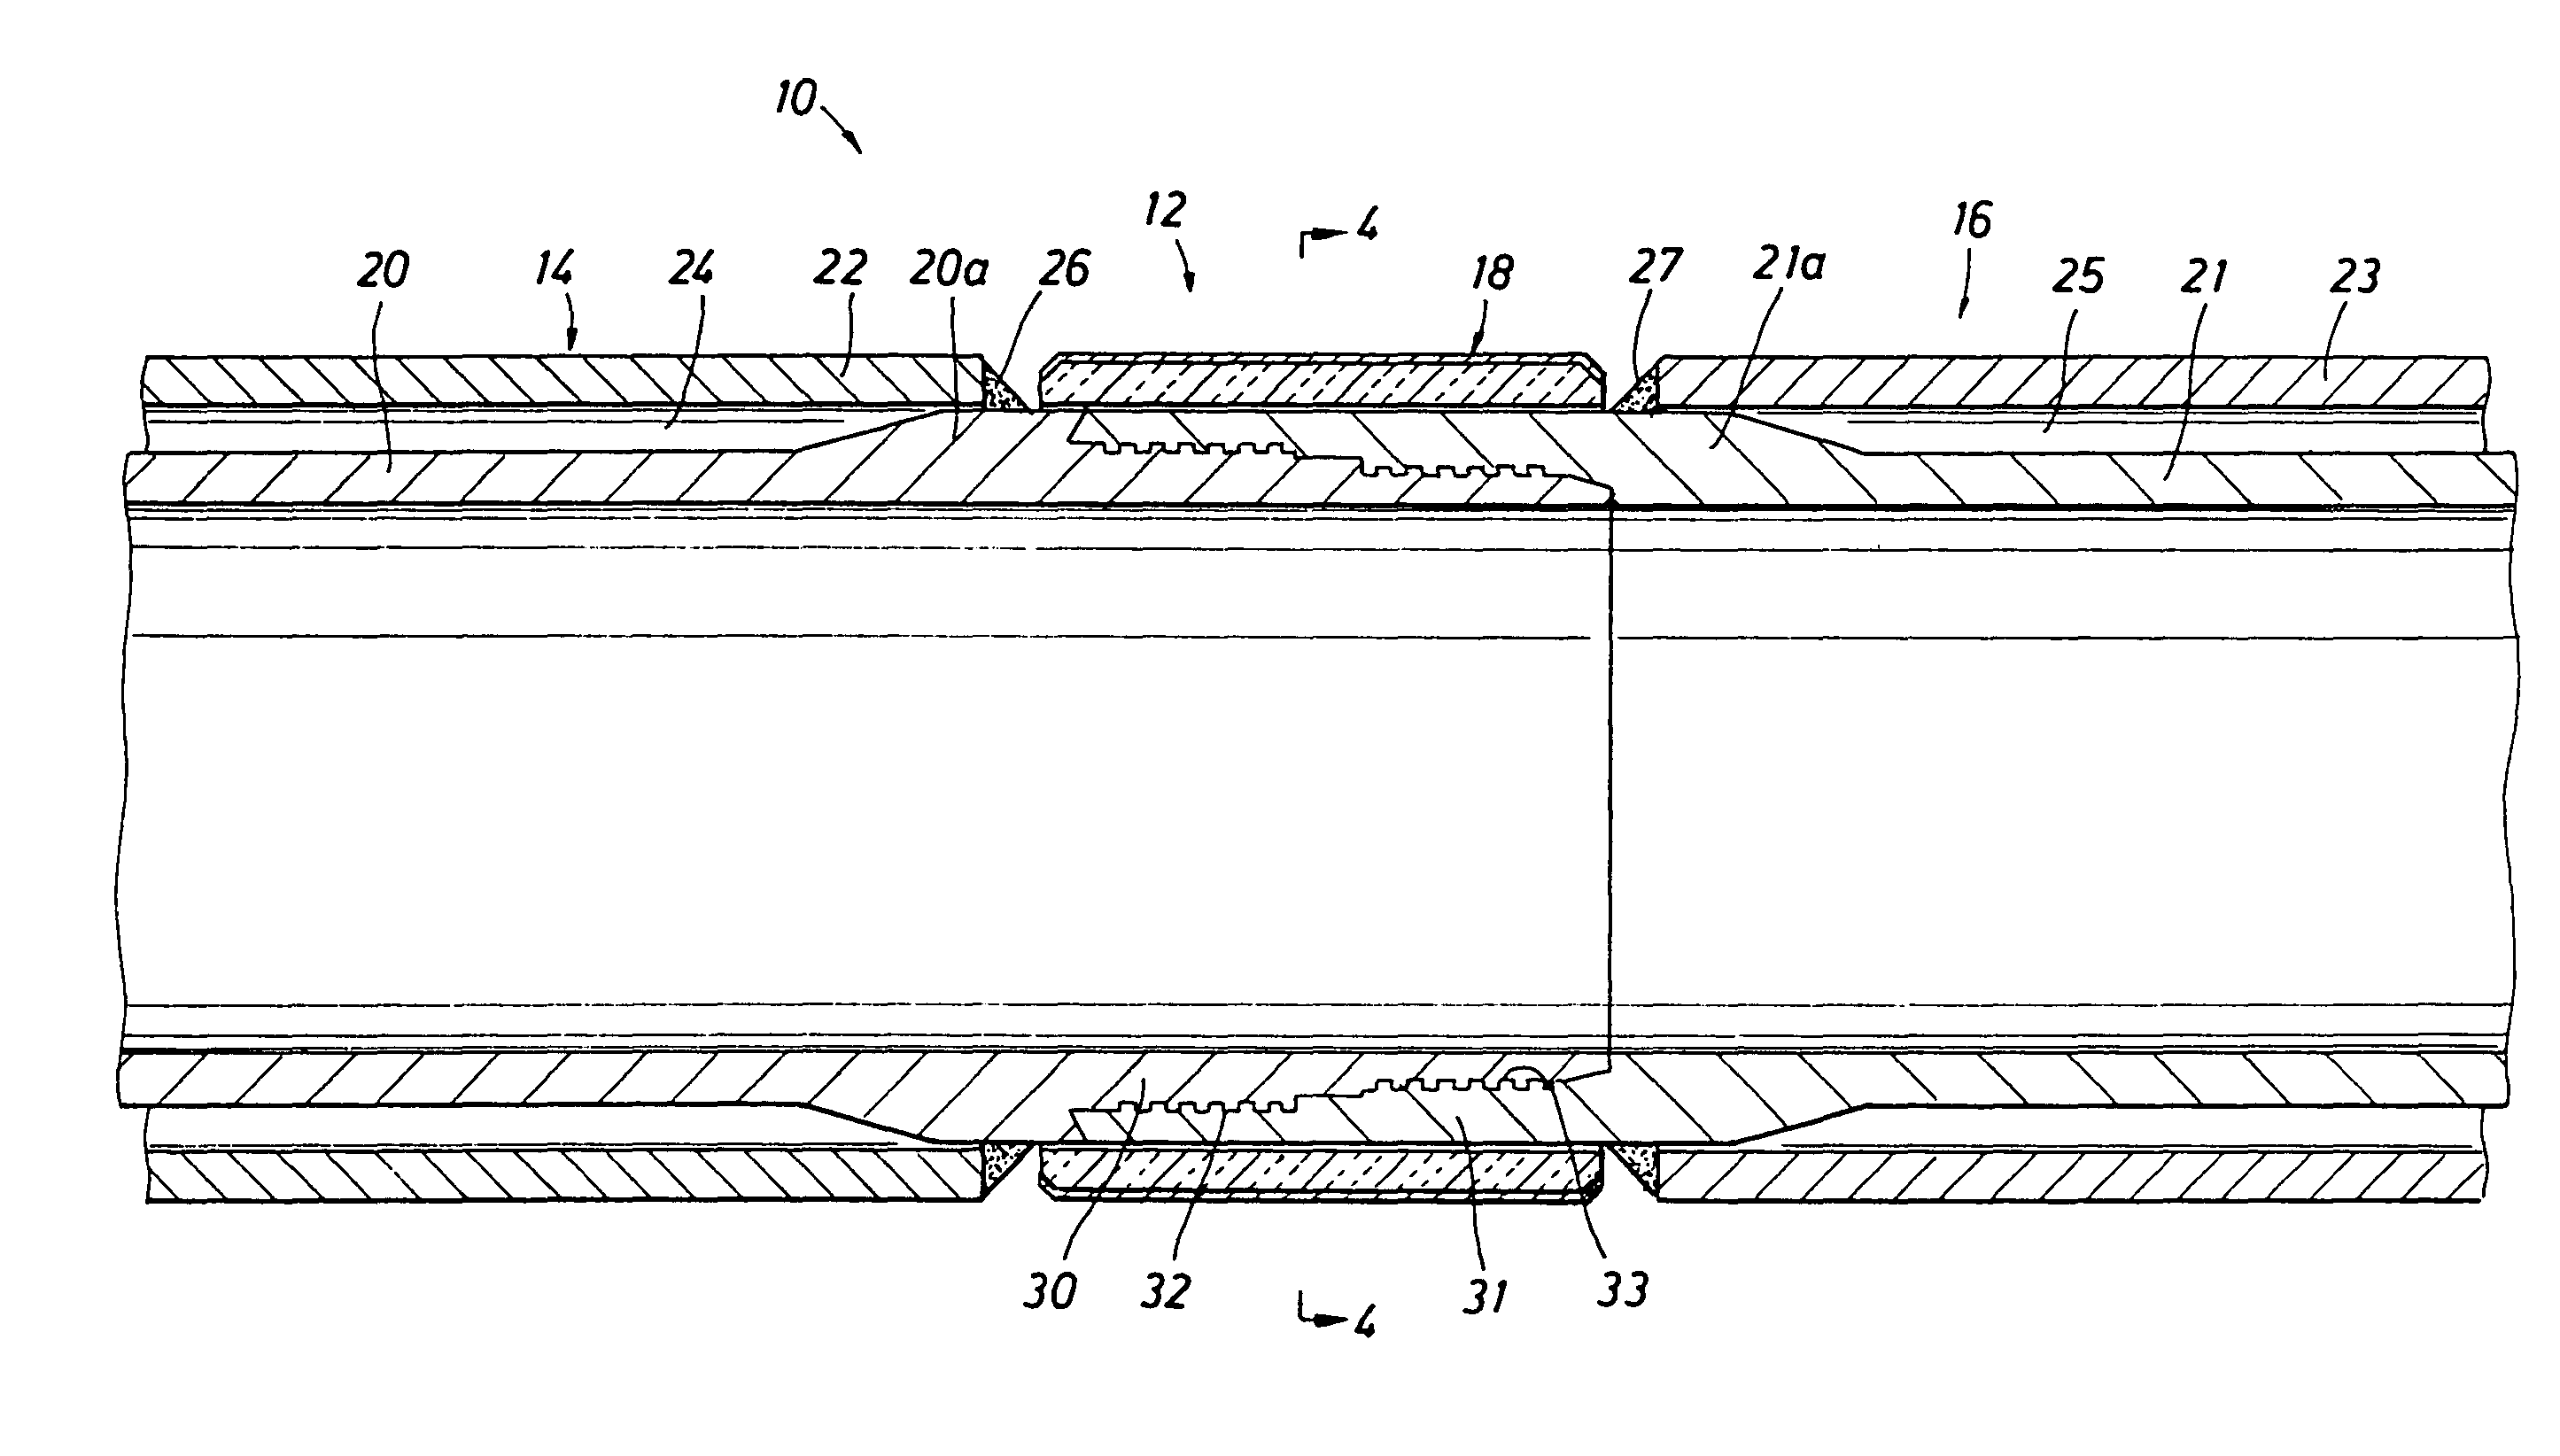 Insulated tubular assembly